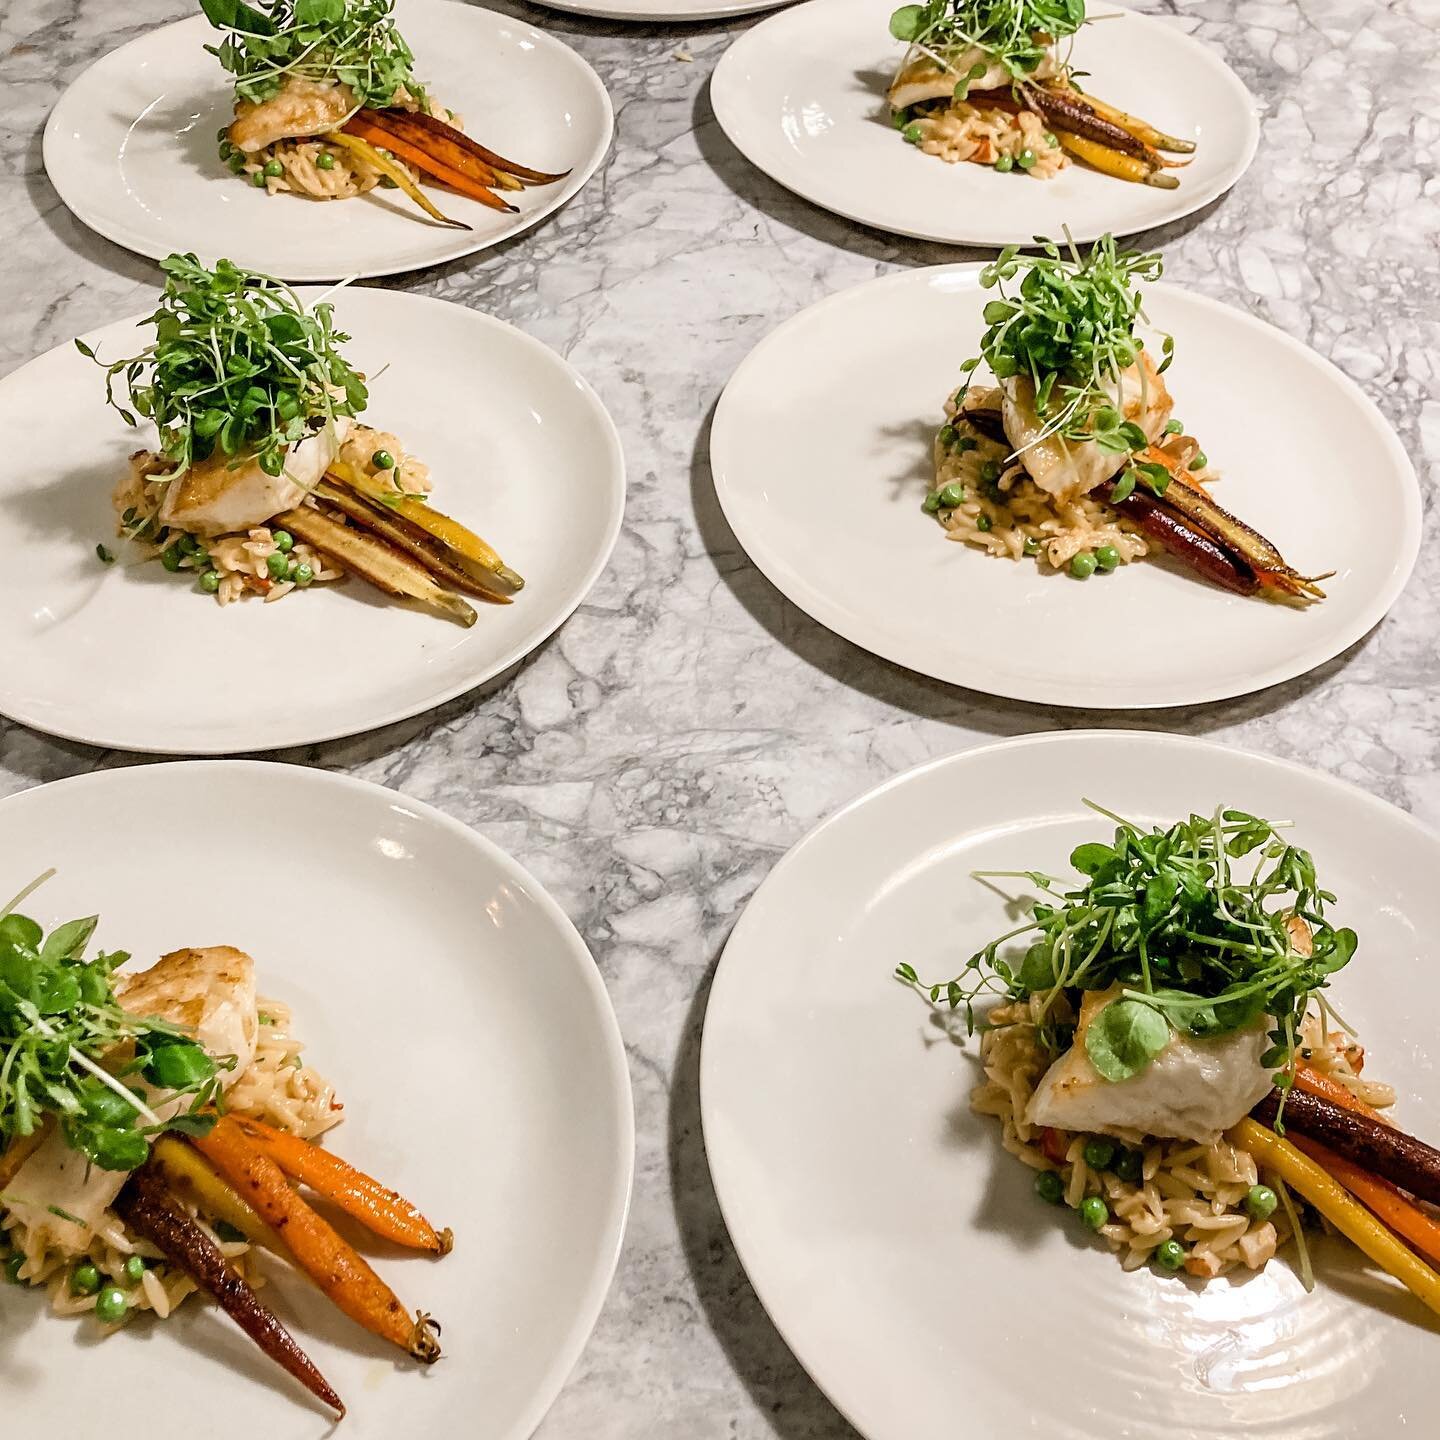 Homage to spring- spring pea orzo, roasted rainbow carrots, seared Chilean sea bass, pea shoots 

#chefconsultant #cheflife #ctbites #chef #food #catering #personalchef #instafood #chefsofinstagram #foodstagram #foodporn #foodphotography #foodlover #